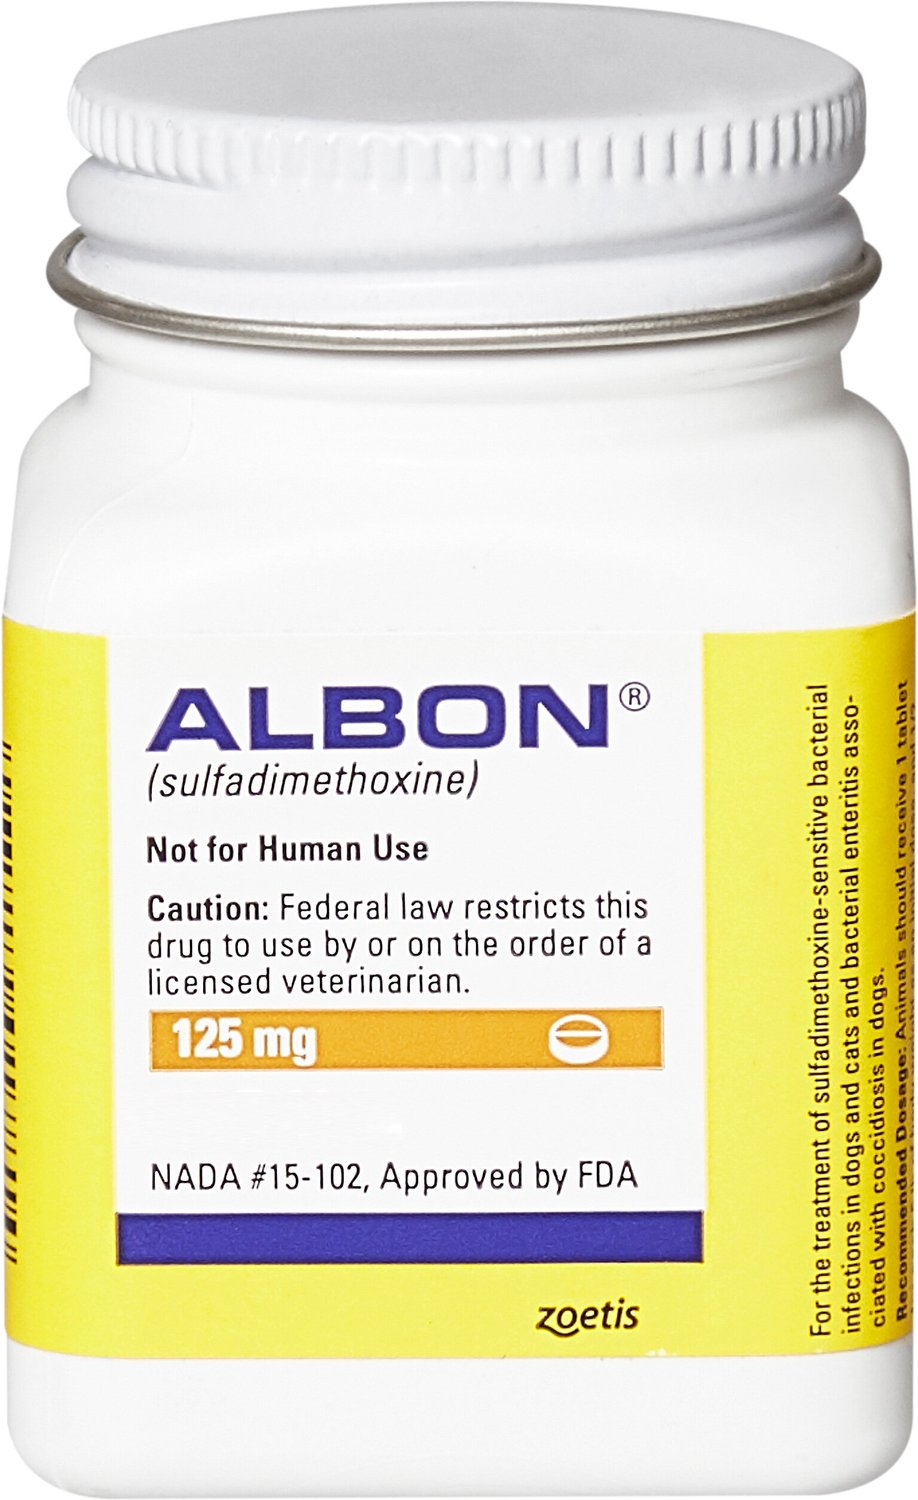 ALBON Tablets for Dogs & Cats, 125mg, 1 tablet